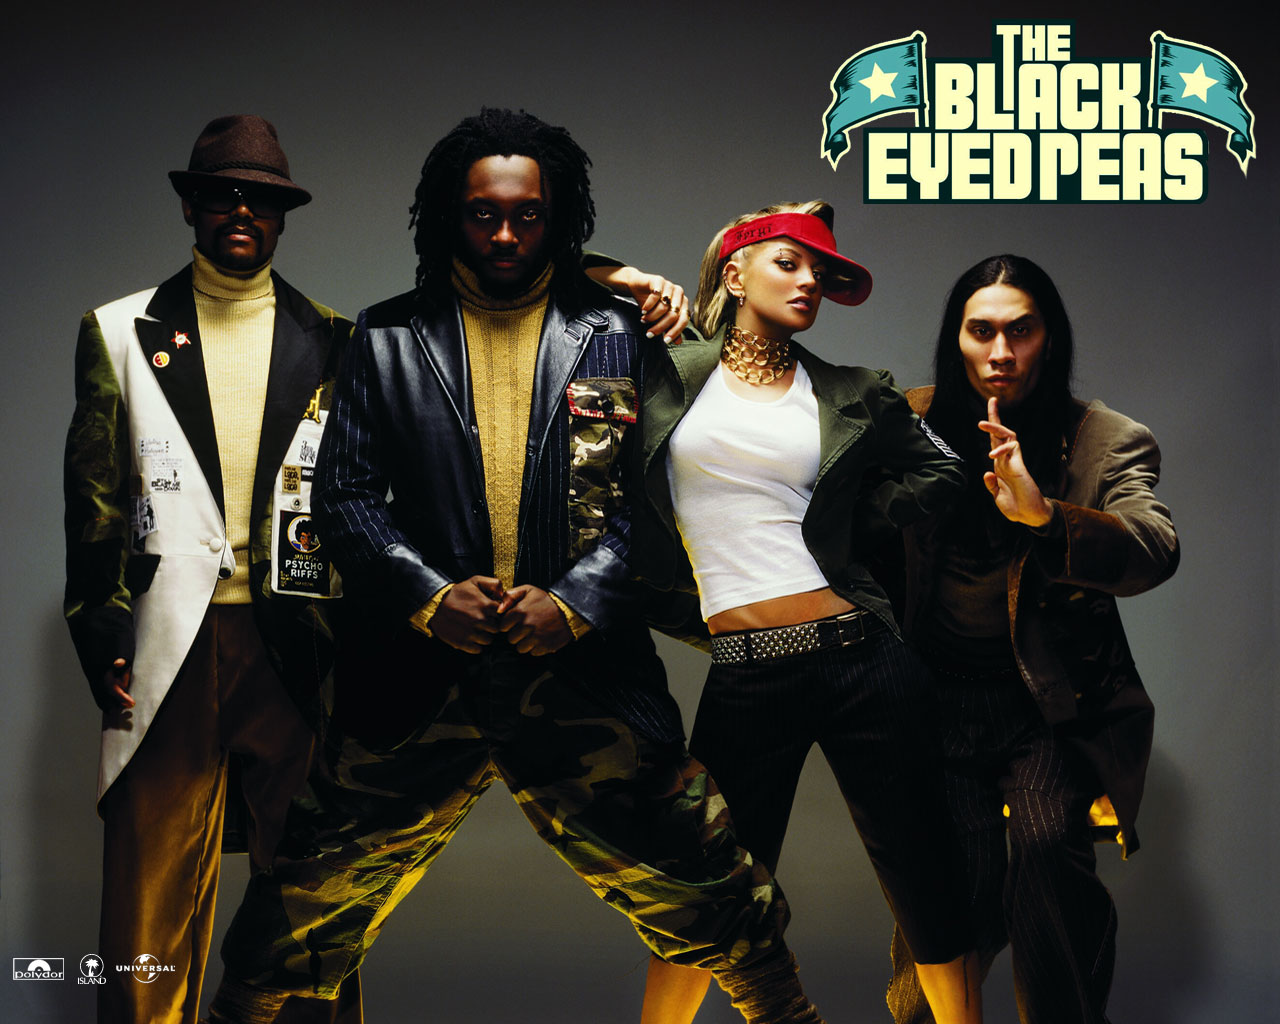 The Black Eyed Peas - More